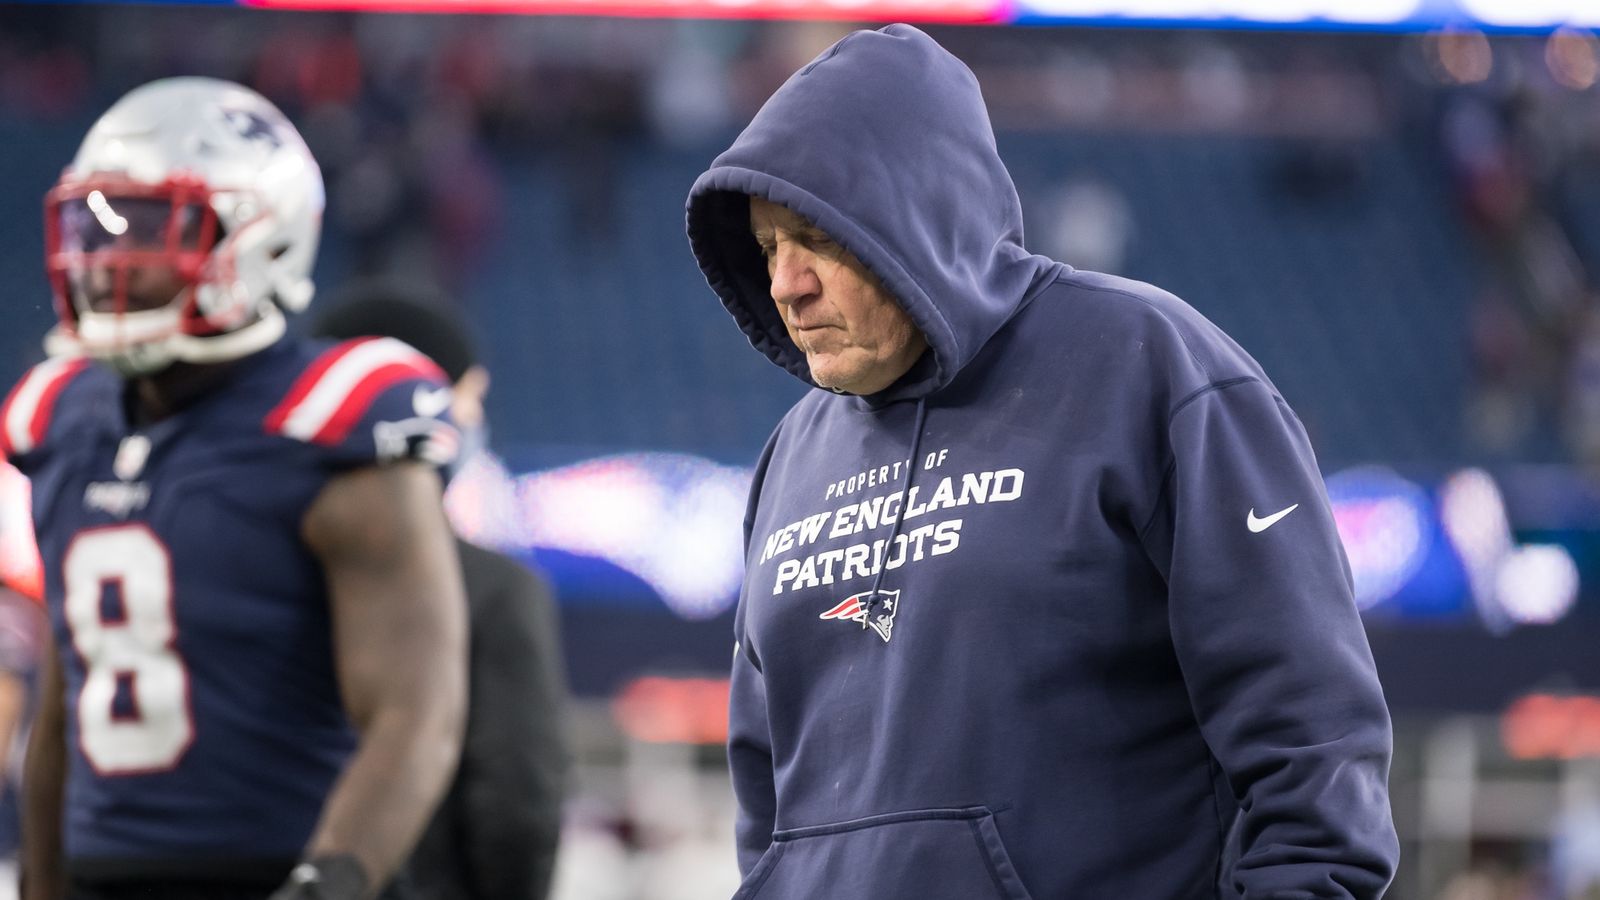 Dan Shaughnessy: Tom Brady would have won this one for the Patriots